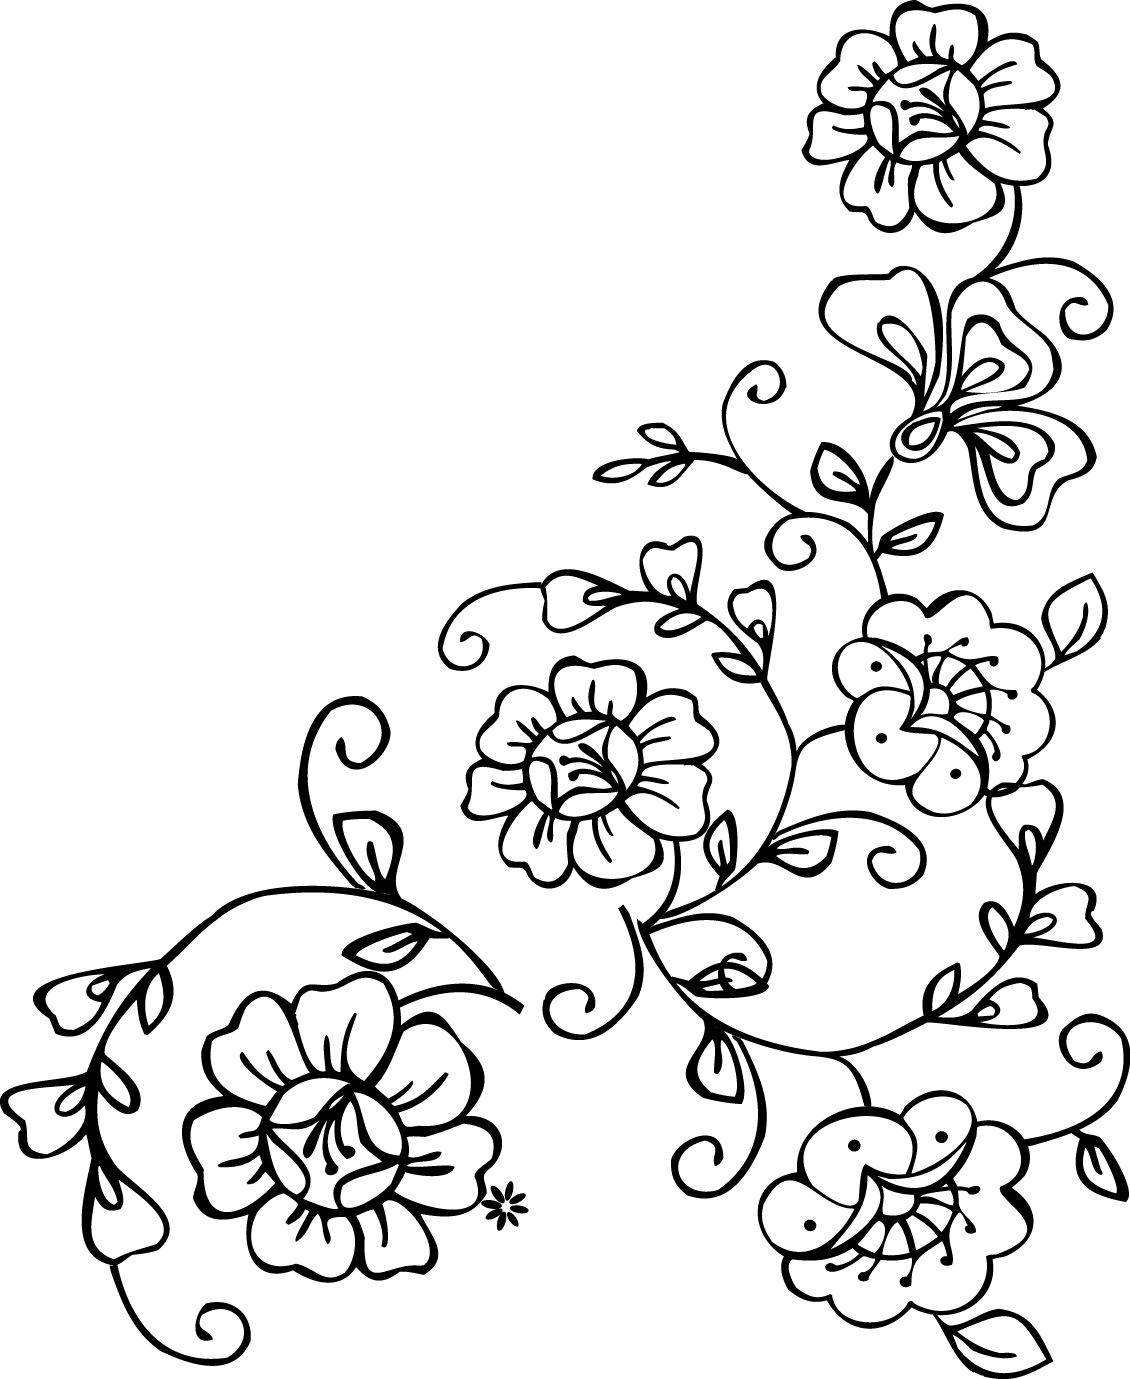 5 Best Images of Printable Paisley Stencil Designs - Free Printable